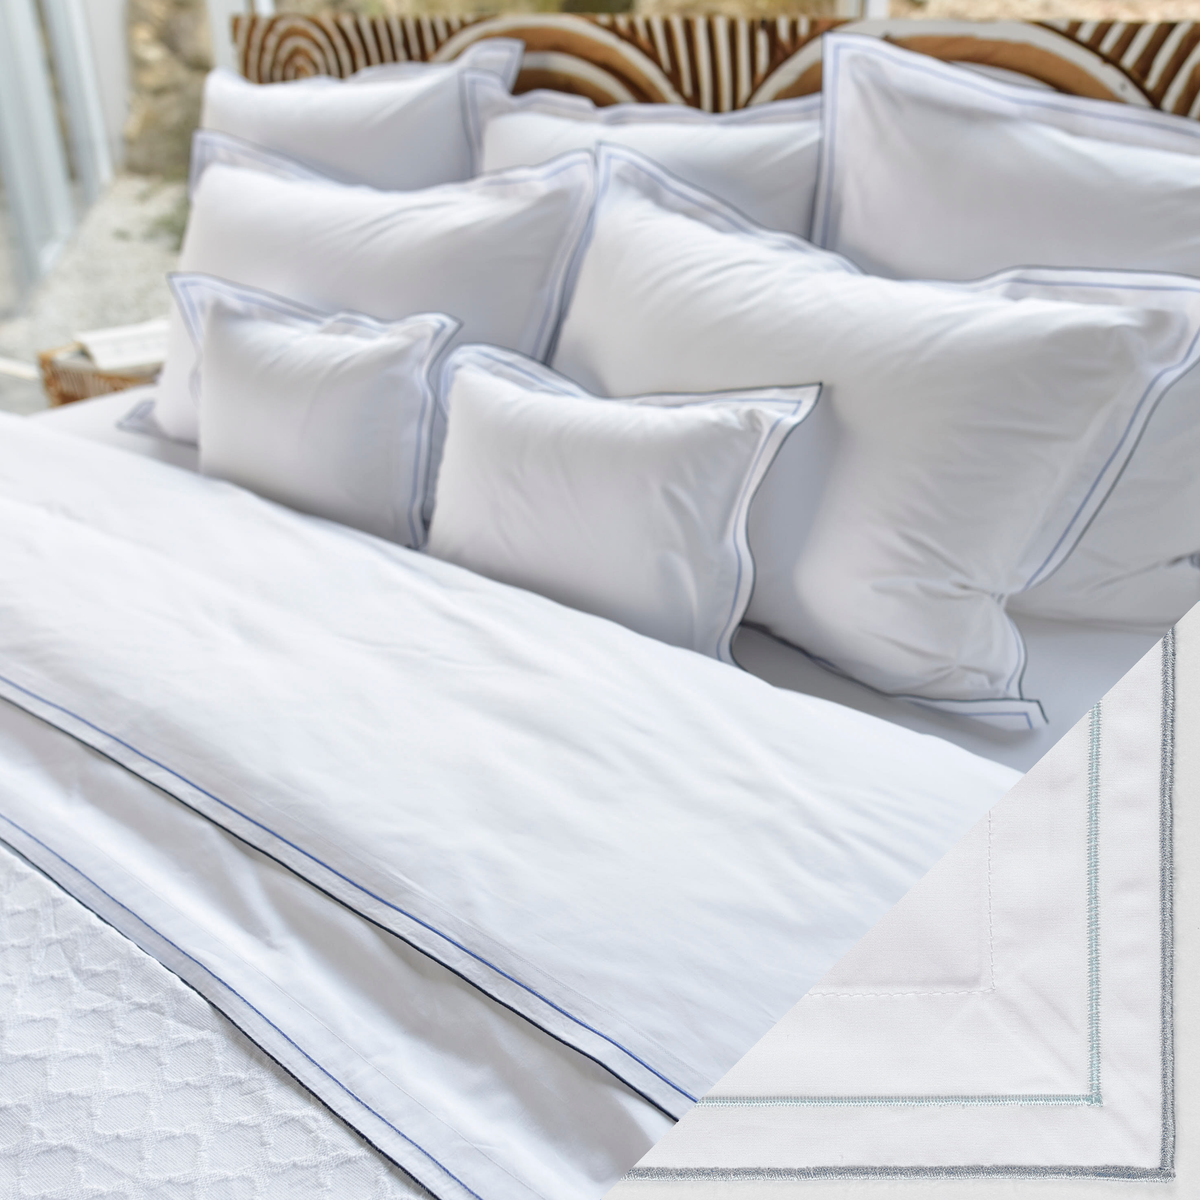 Lifestyle Shot of Celso de Lemos Areo Bedding with Atlantic Swatch